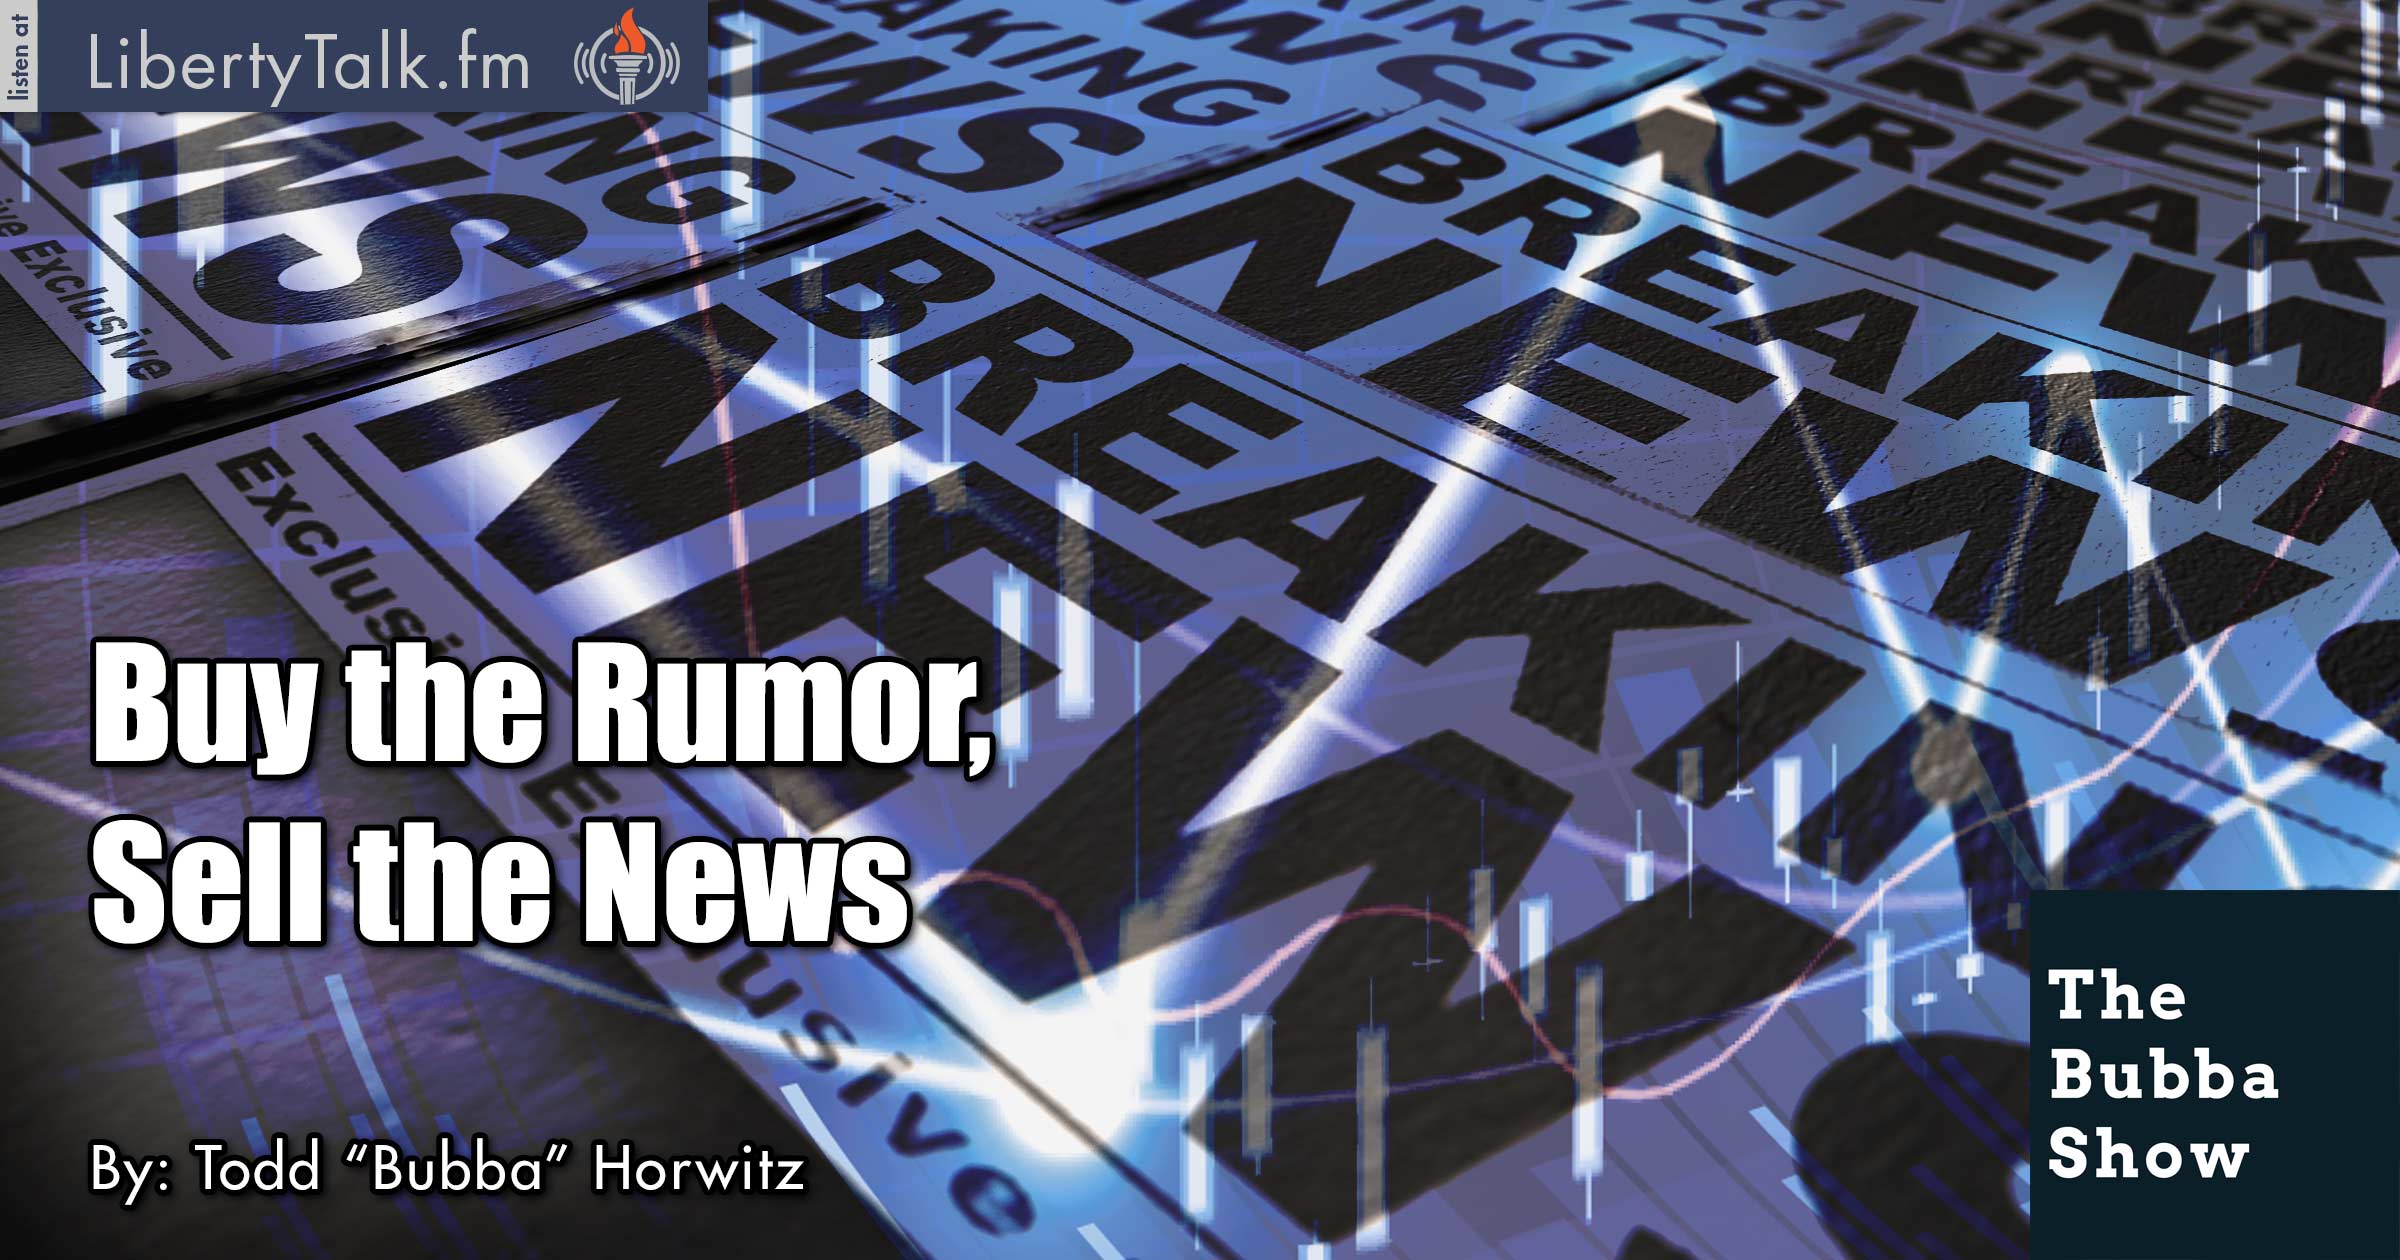 Buy the Rumor, Sell the News - Bubba Show